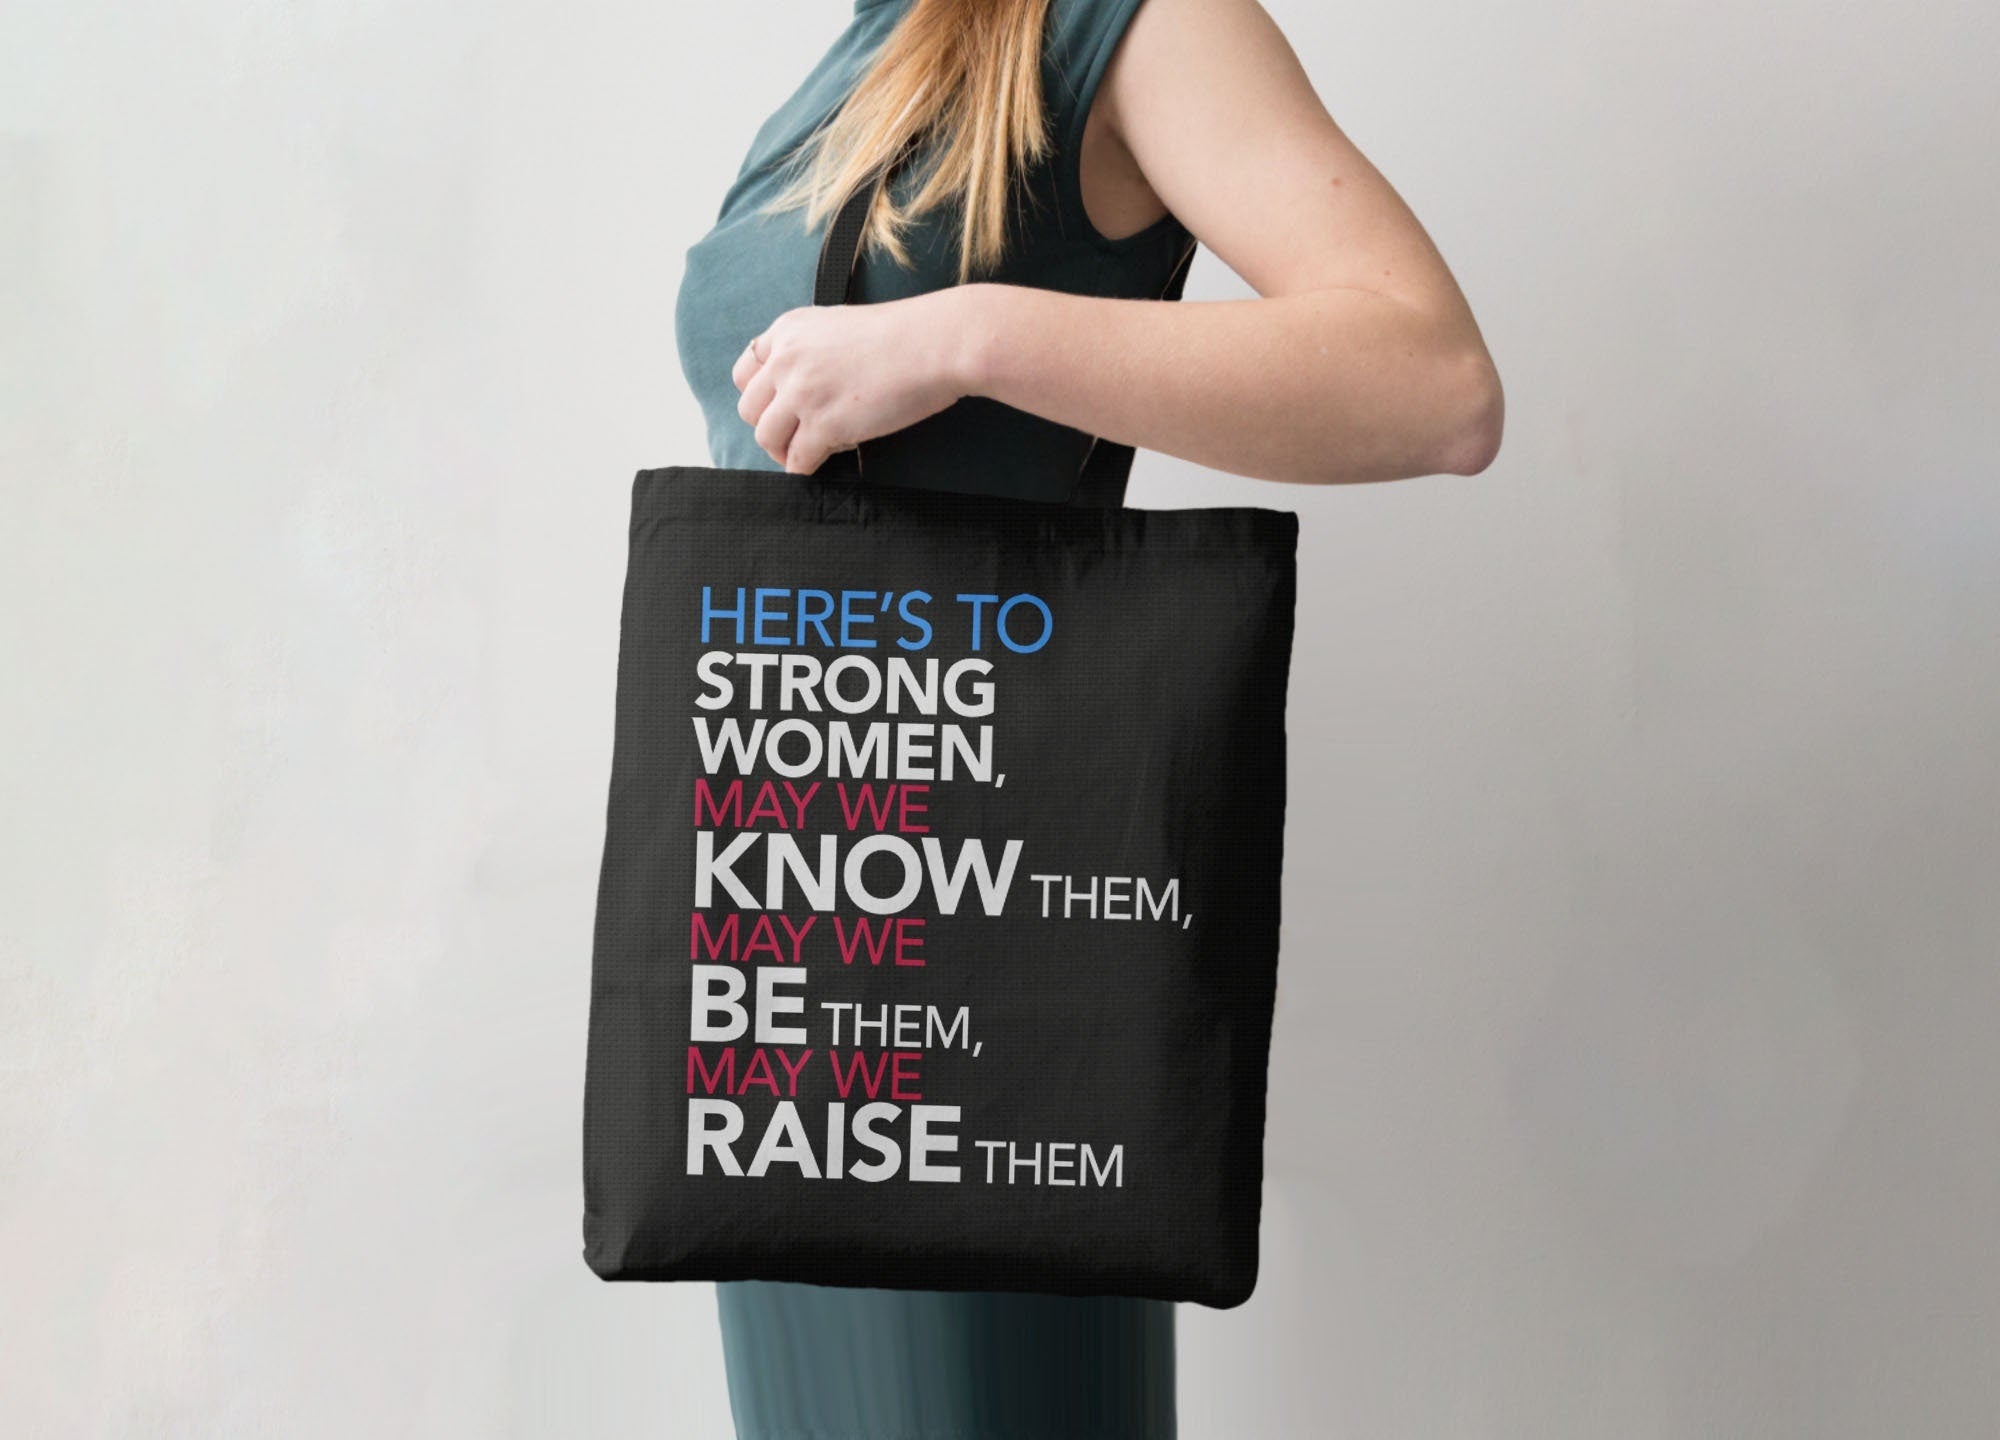 Here's to Strong Women Tote Bag, Tote Bag Black by BootsTees